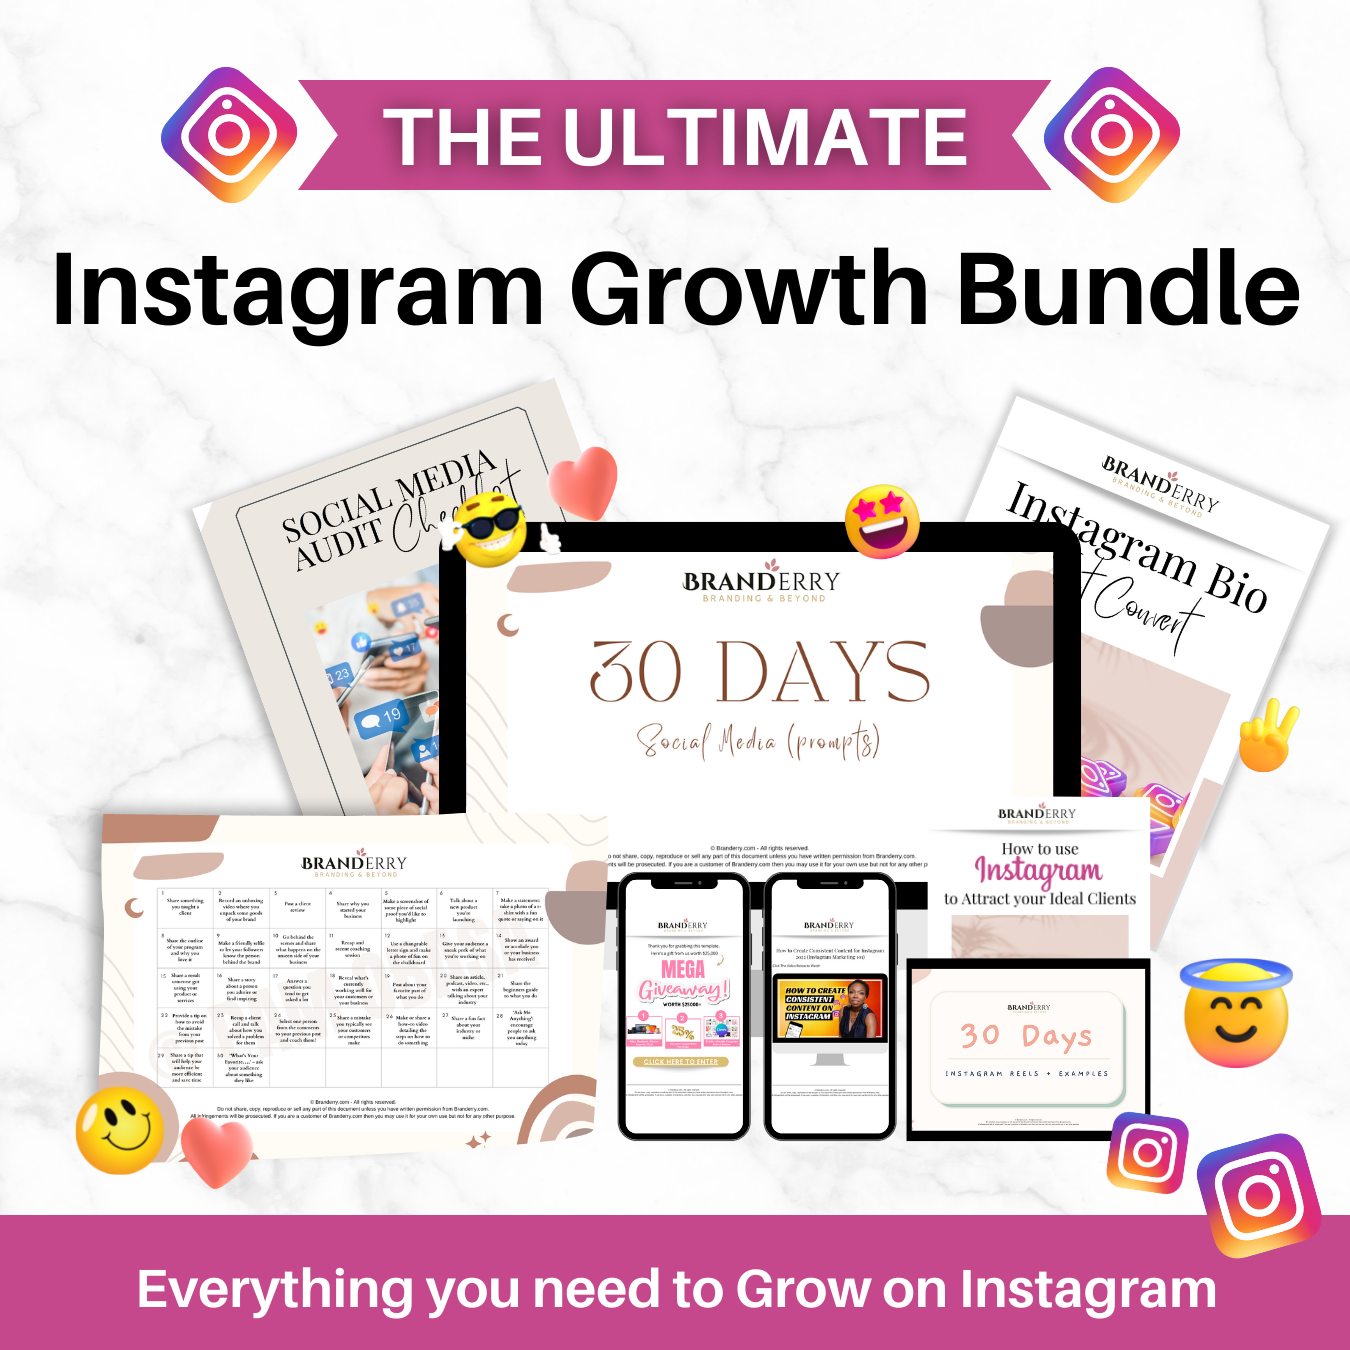 The Ultimate Instagram Growth Bundle